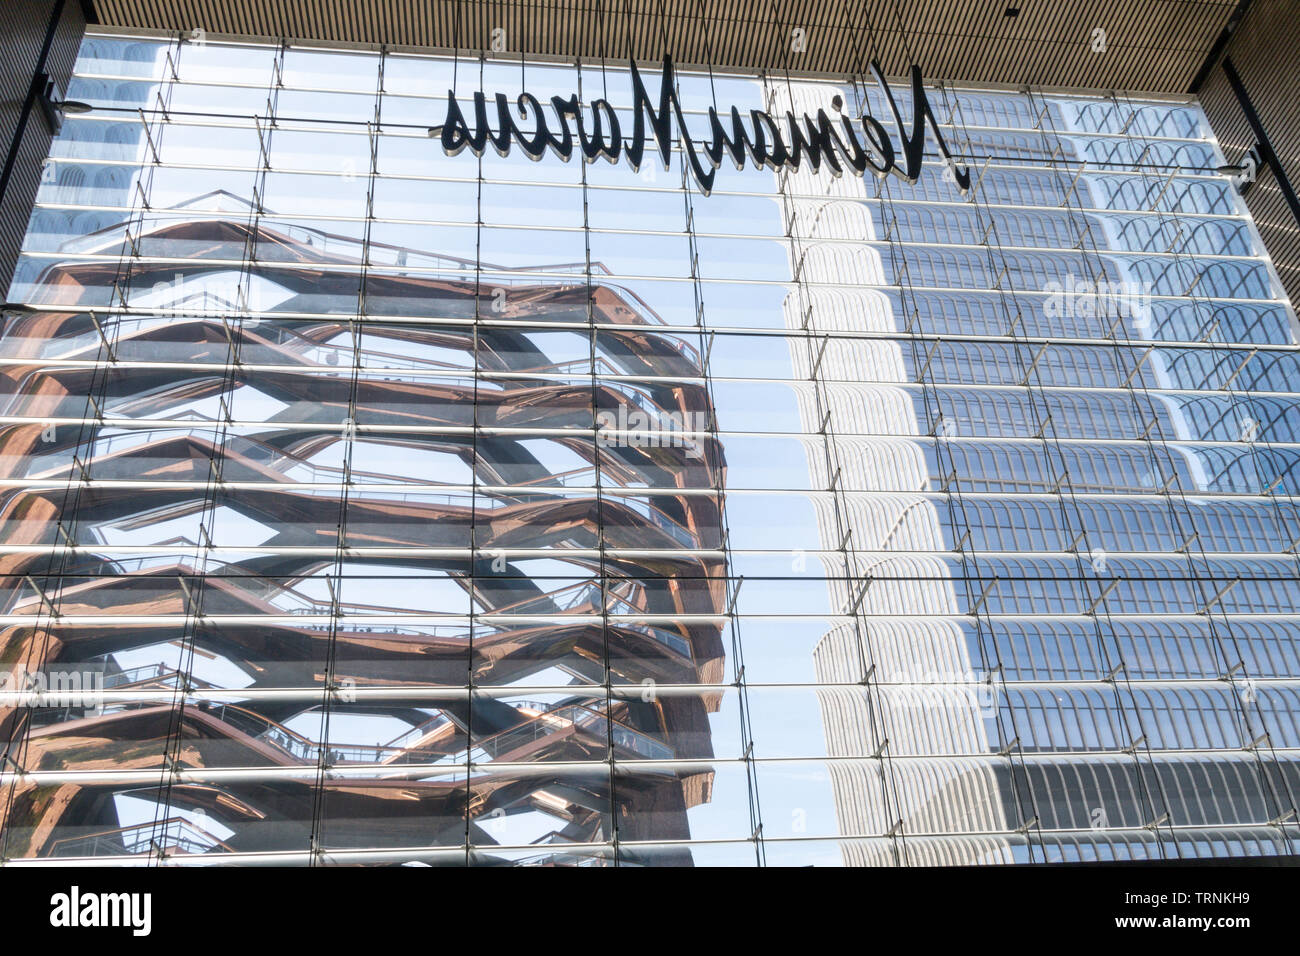 The Vessel as seen from the interior of the Hudson Yards Shopping Complex, NYC, USA Stock Photo